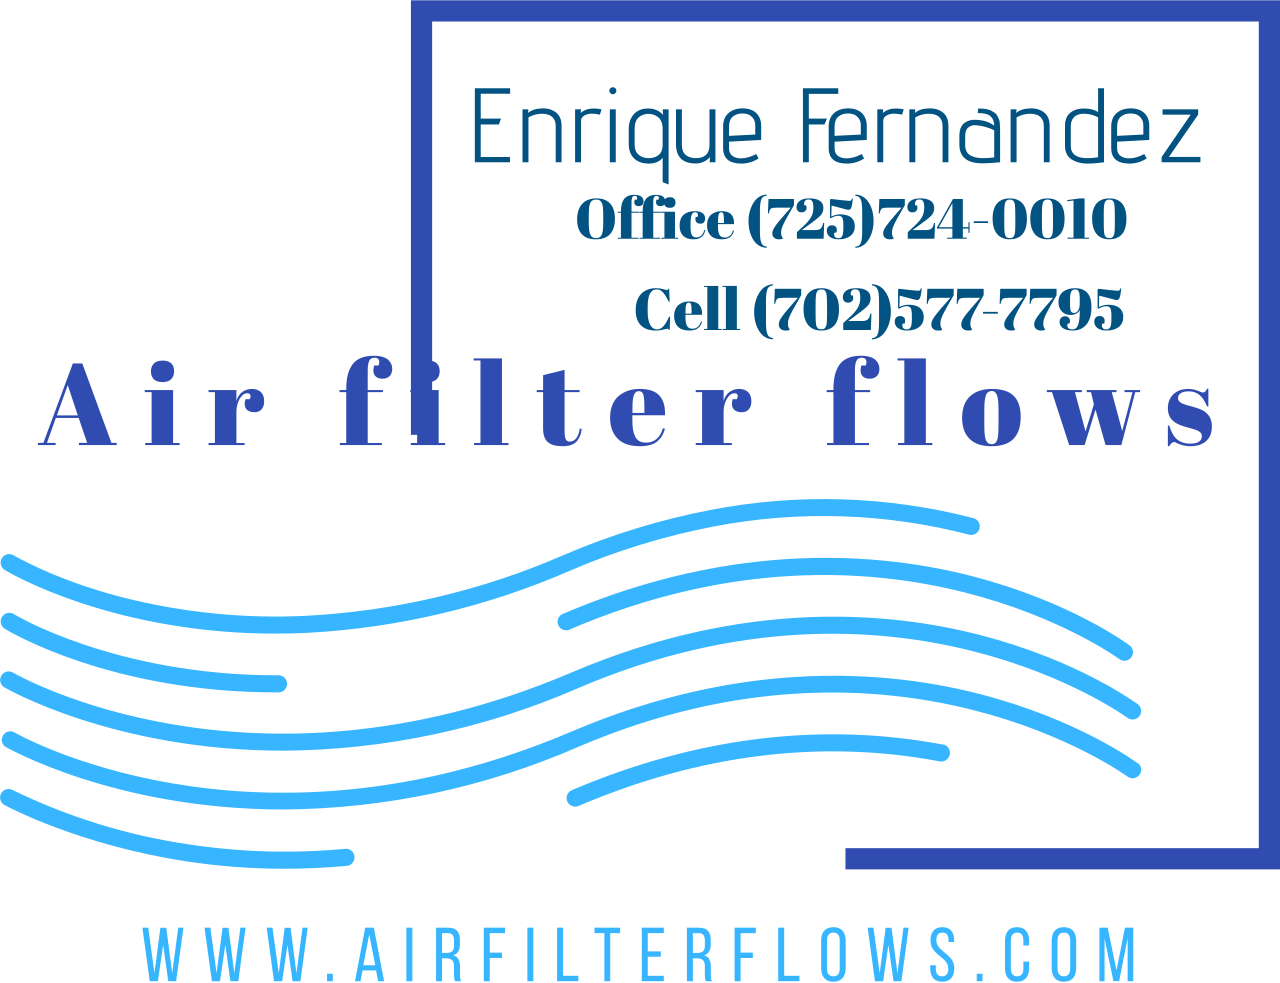 Air filter flows 's web page